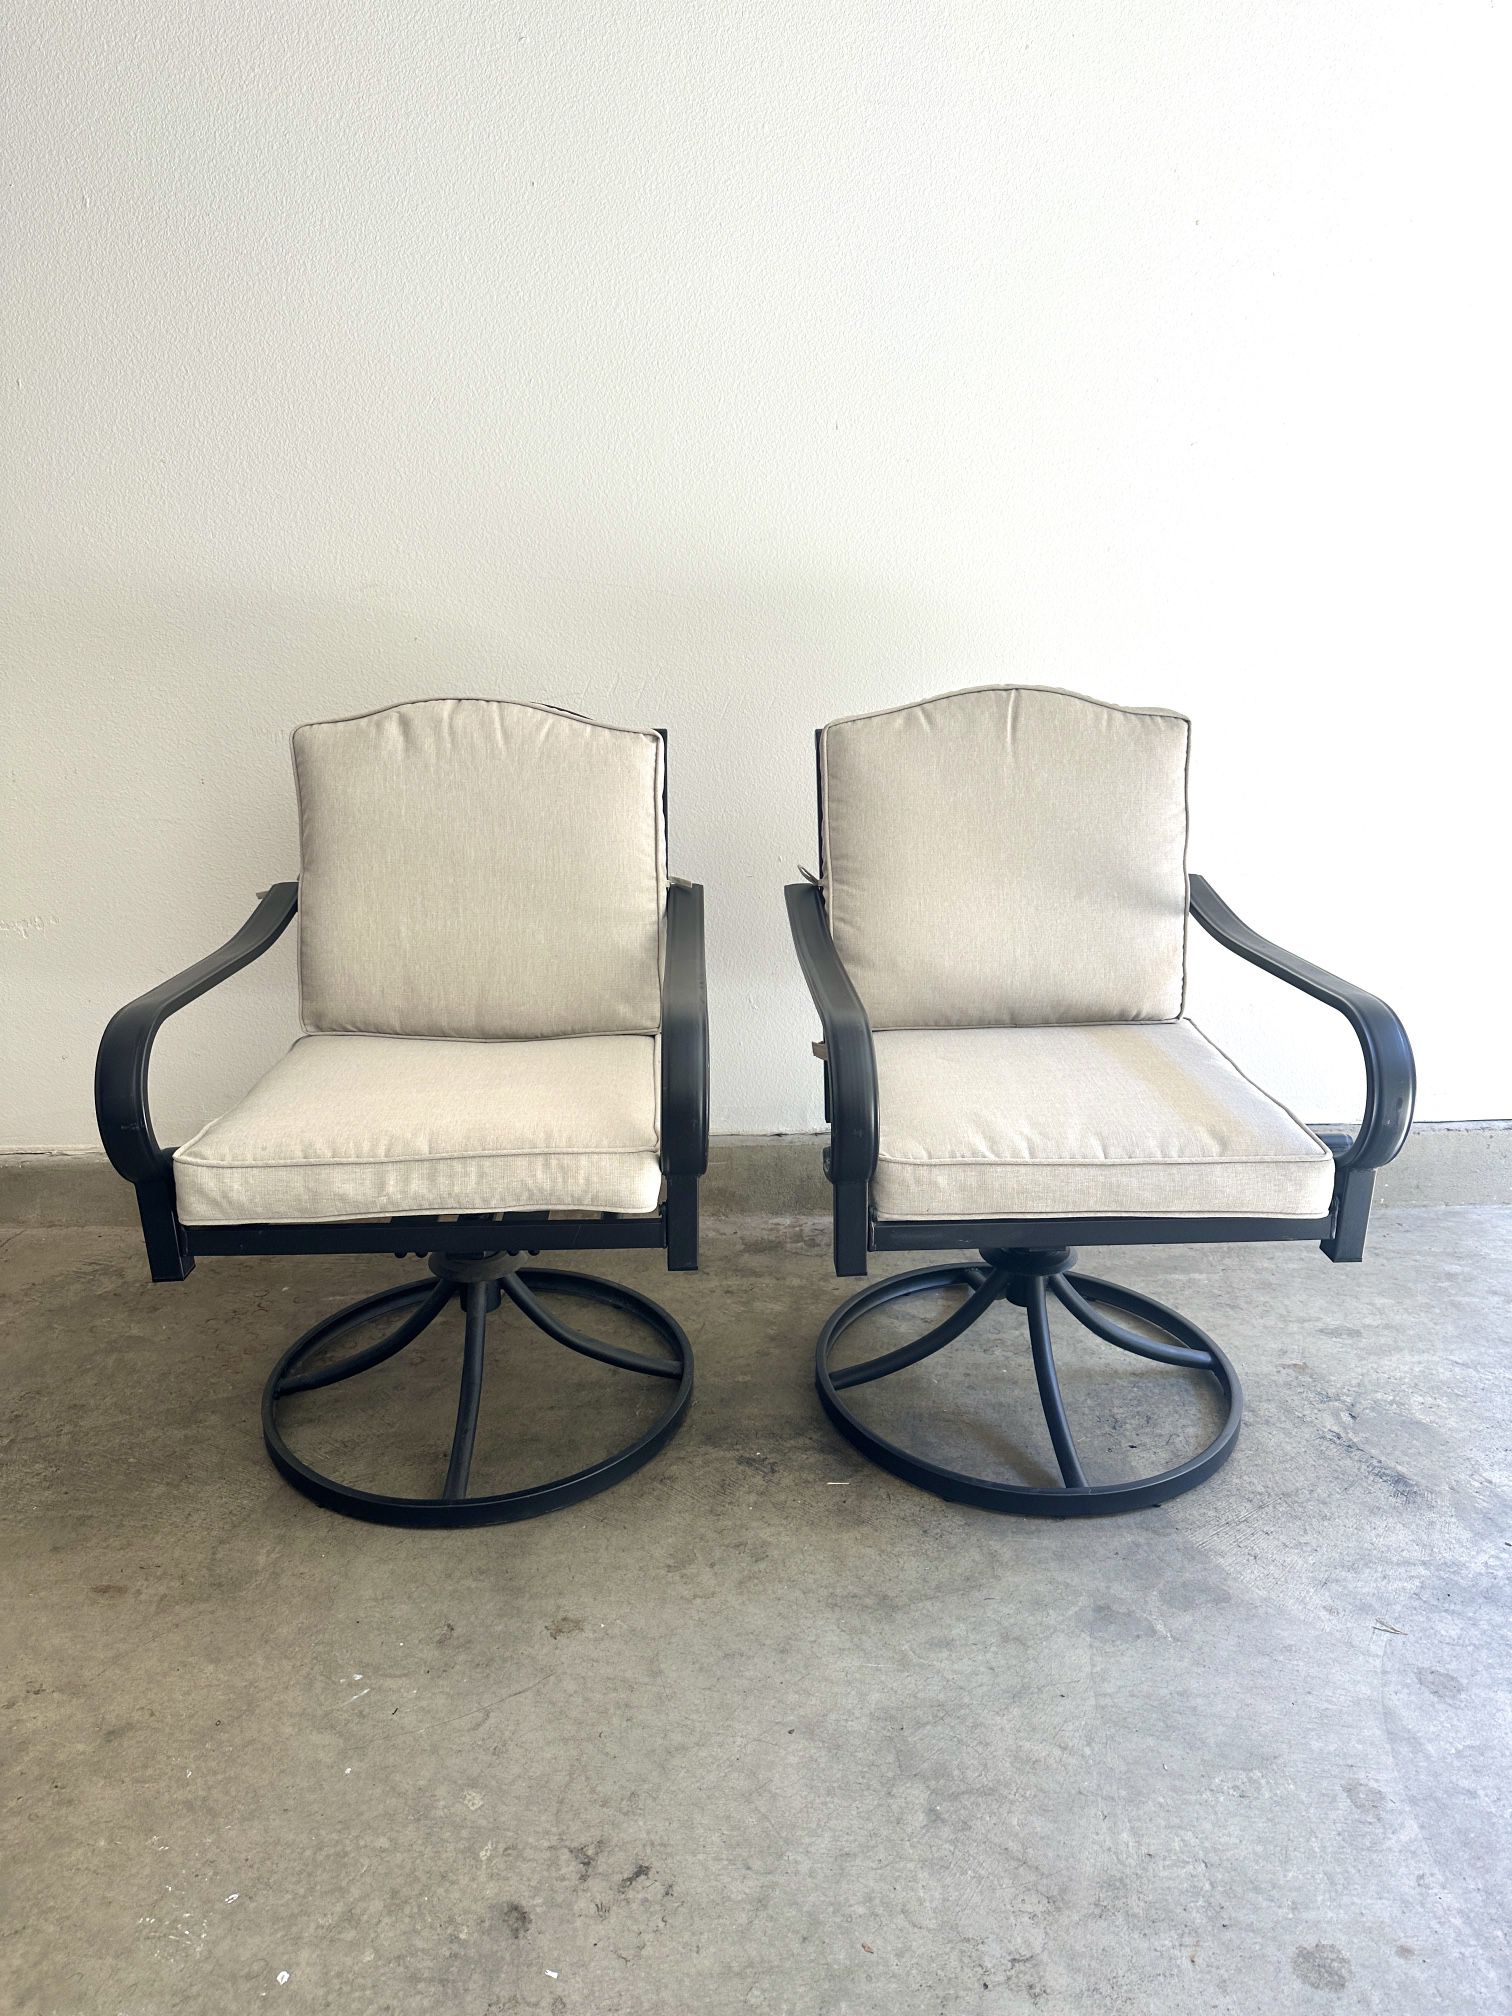 For Sale: Lightly Used Patio Swivel Chairs(Set Of 2)